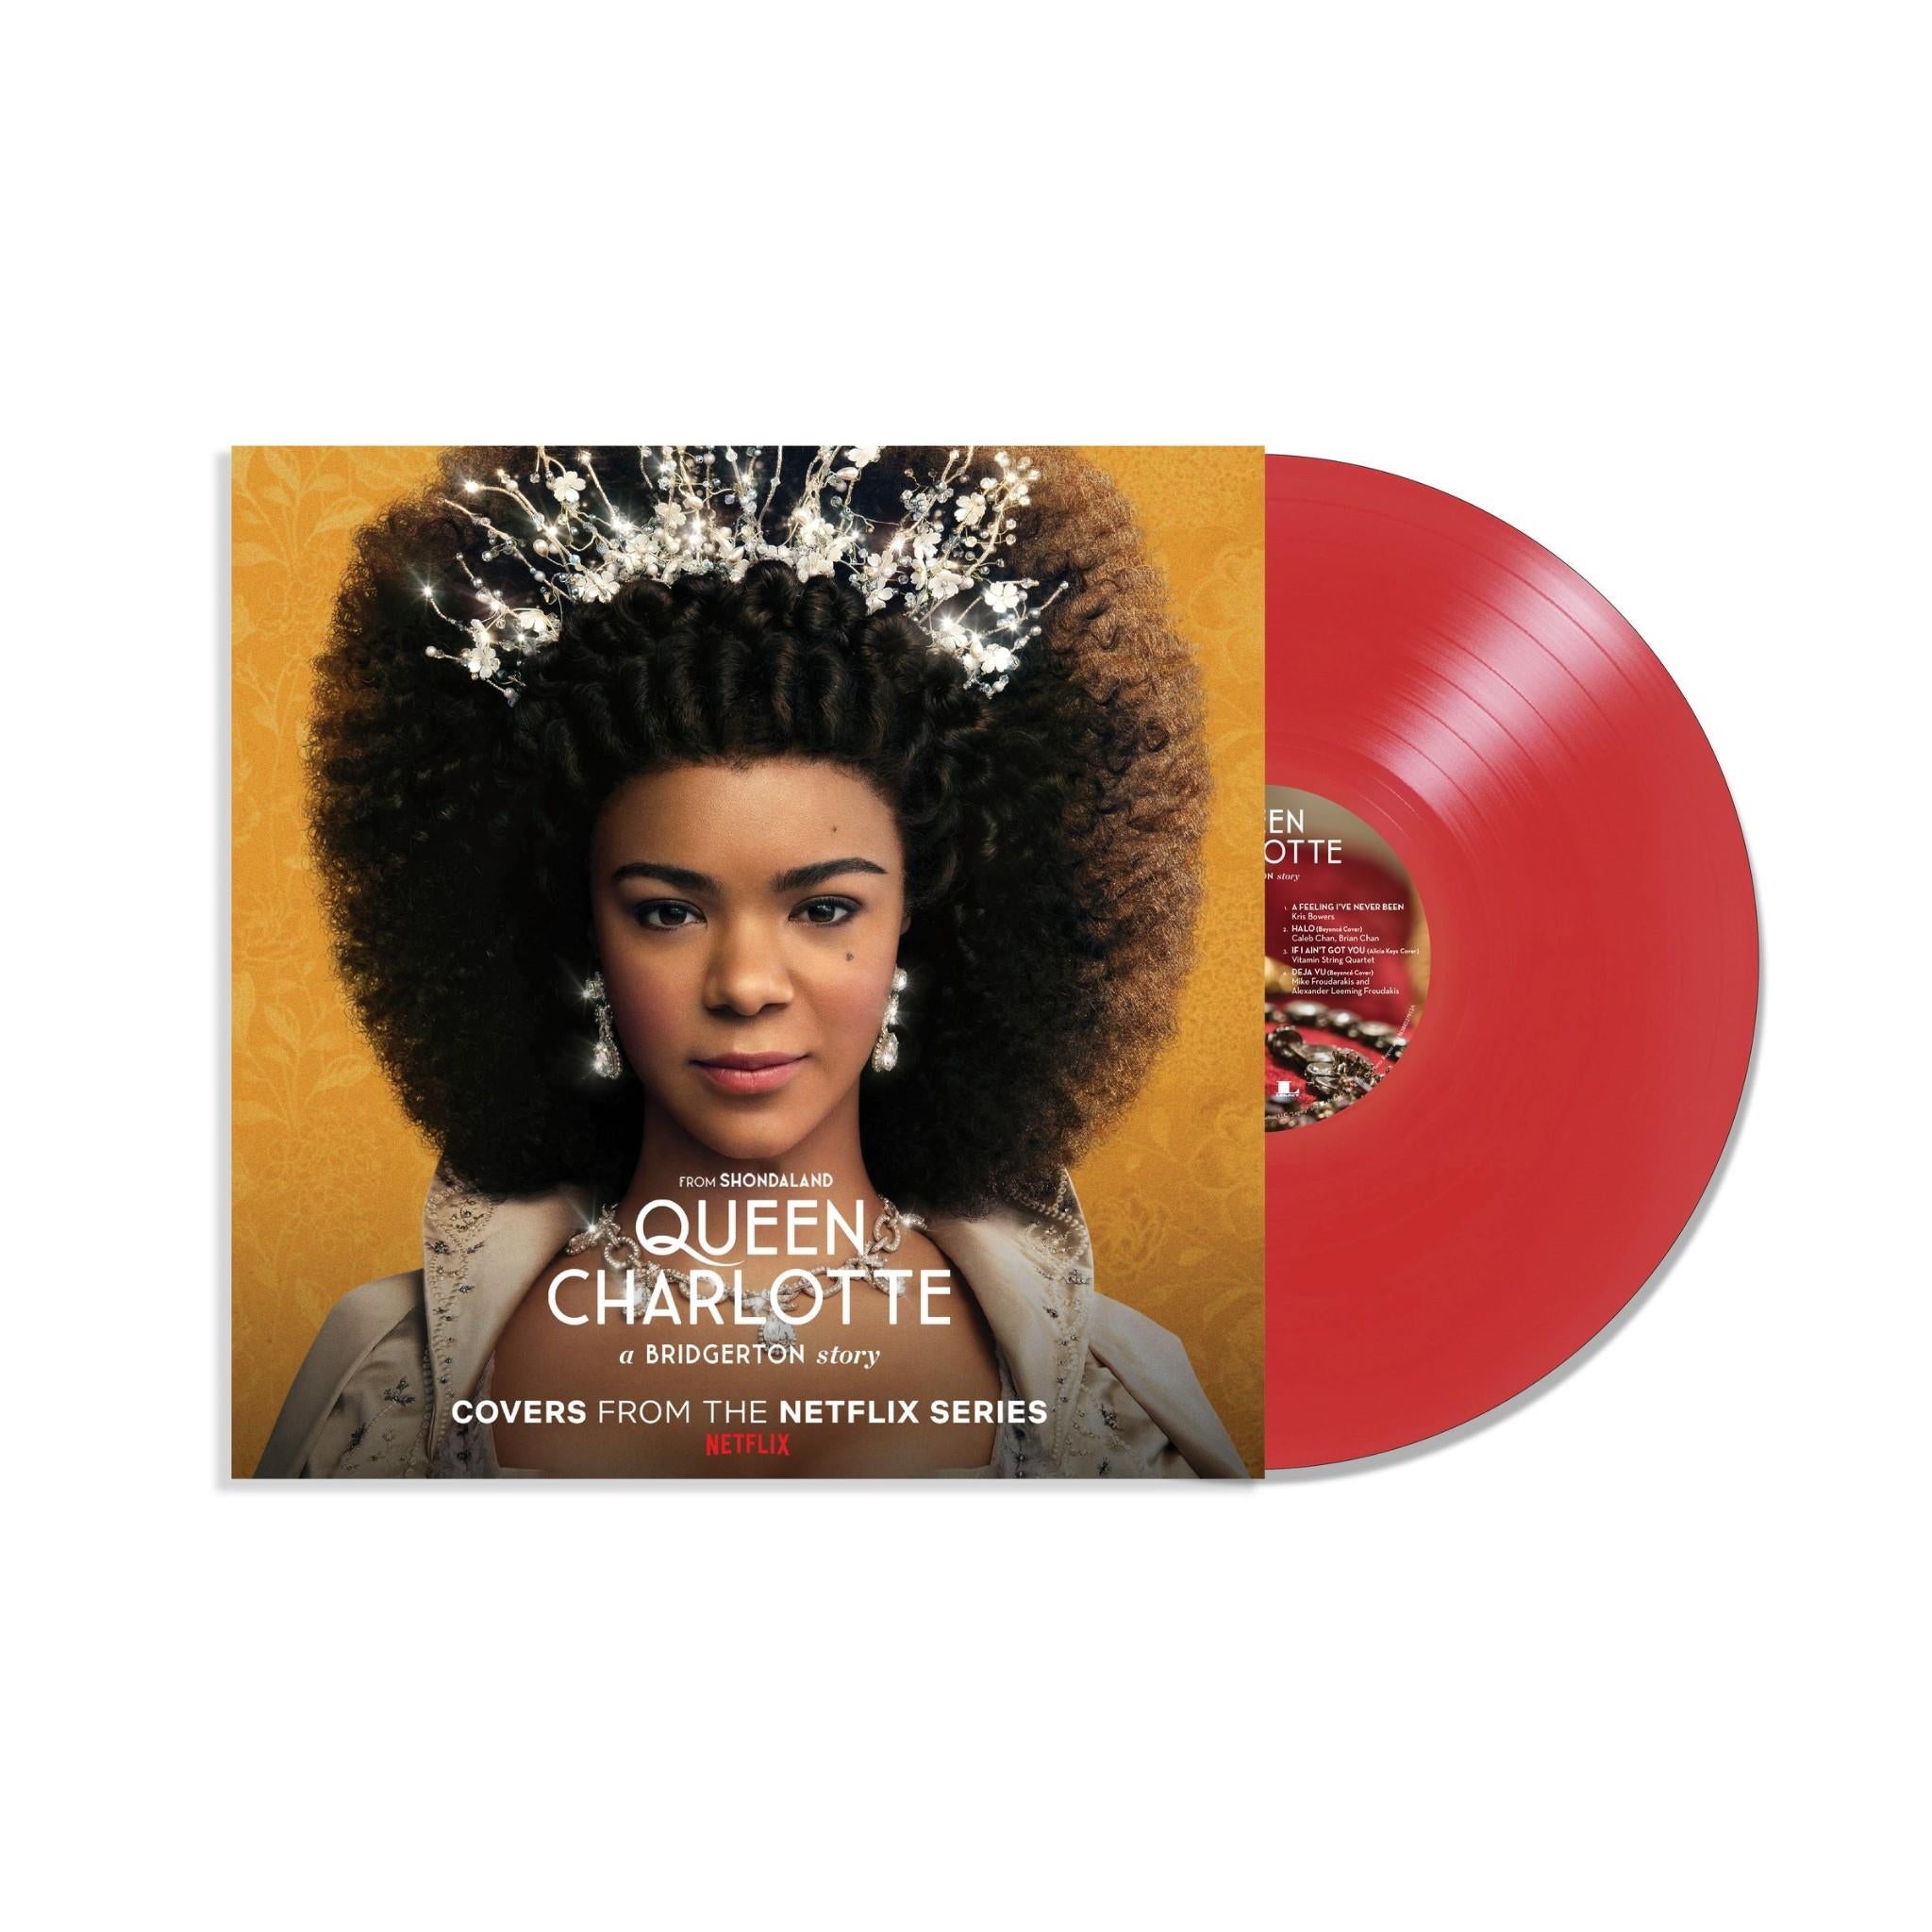 queen charlotte: a bridgerton story (covers from the netflix series) (translucent ruby vinyl)